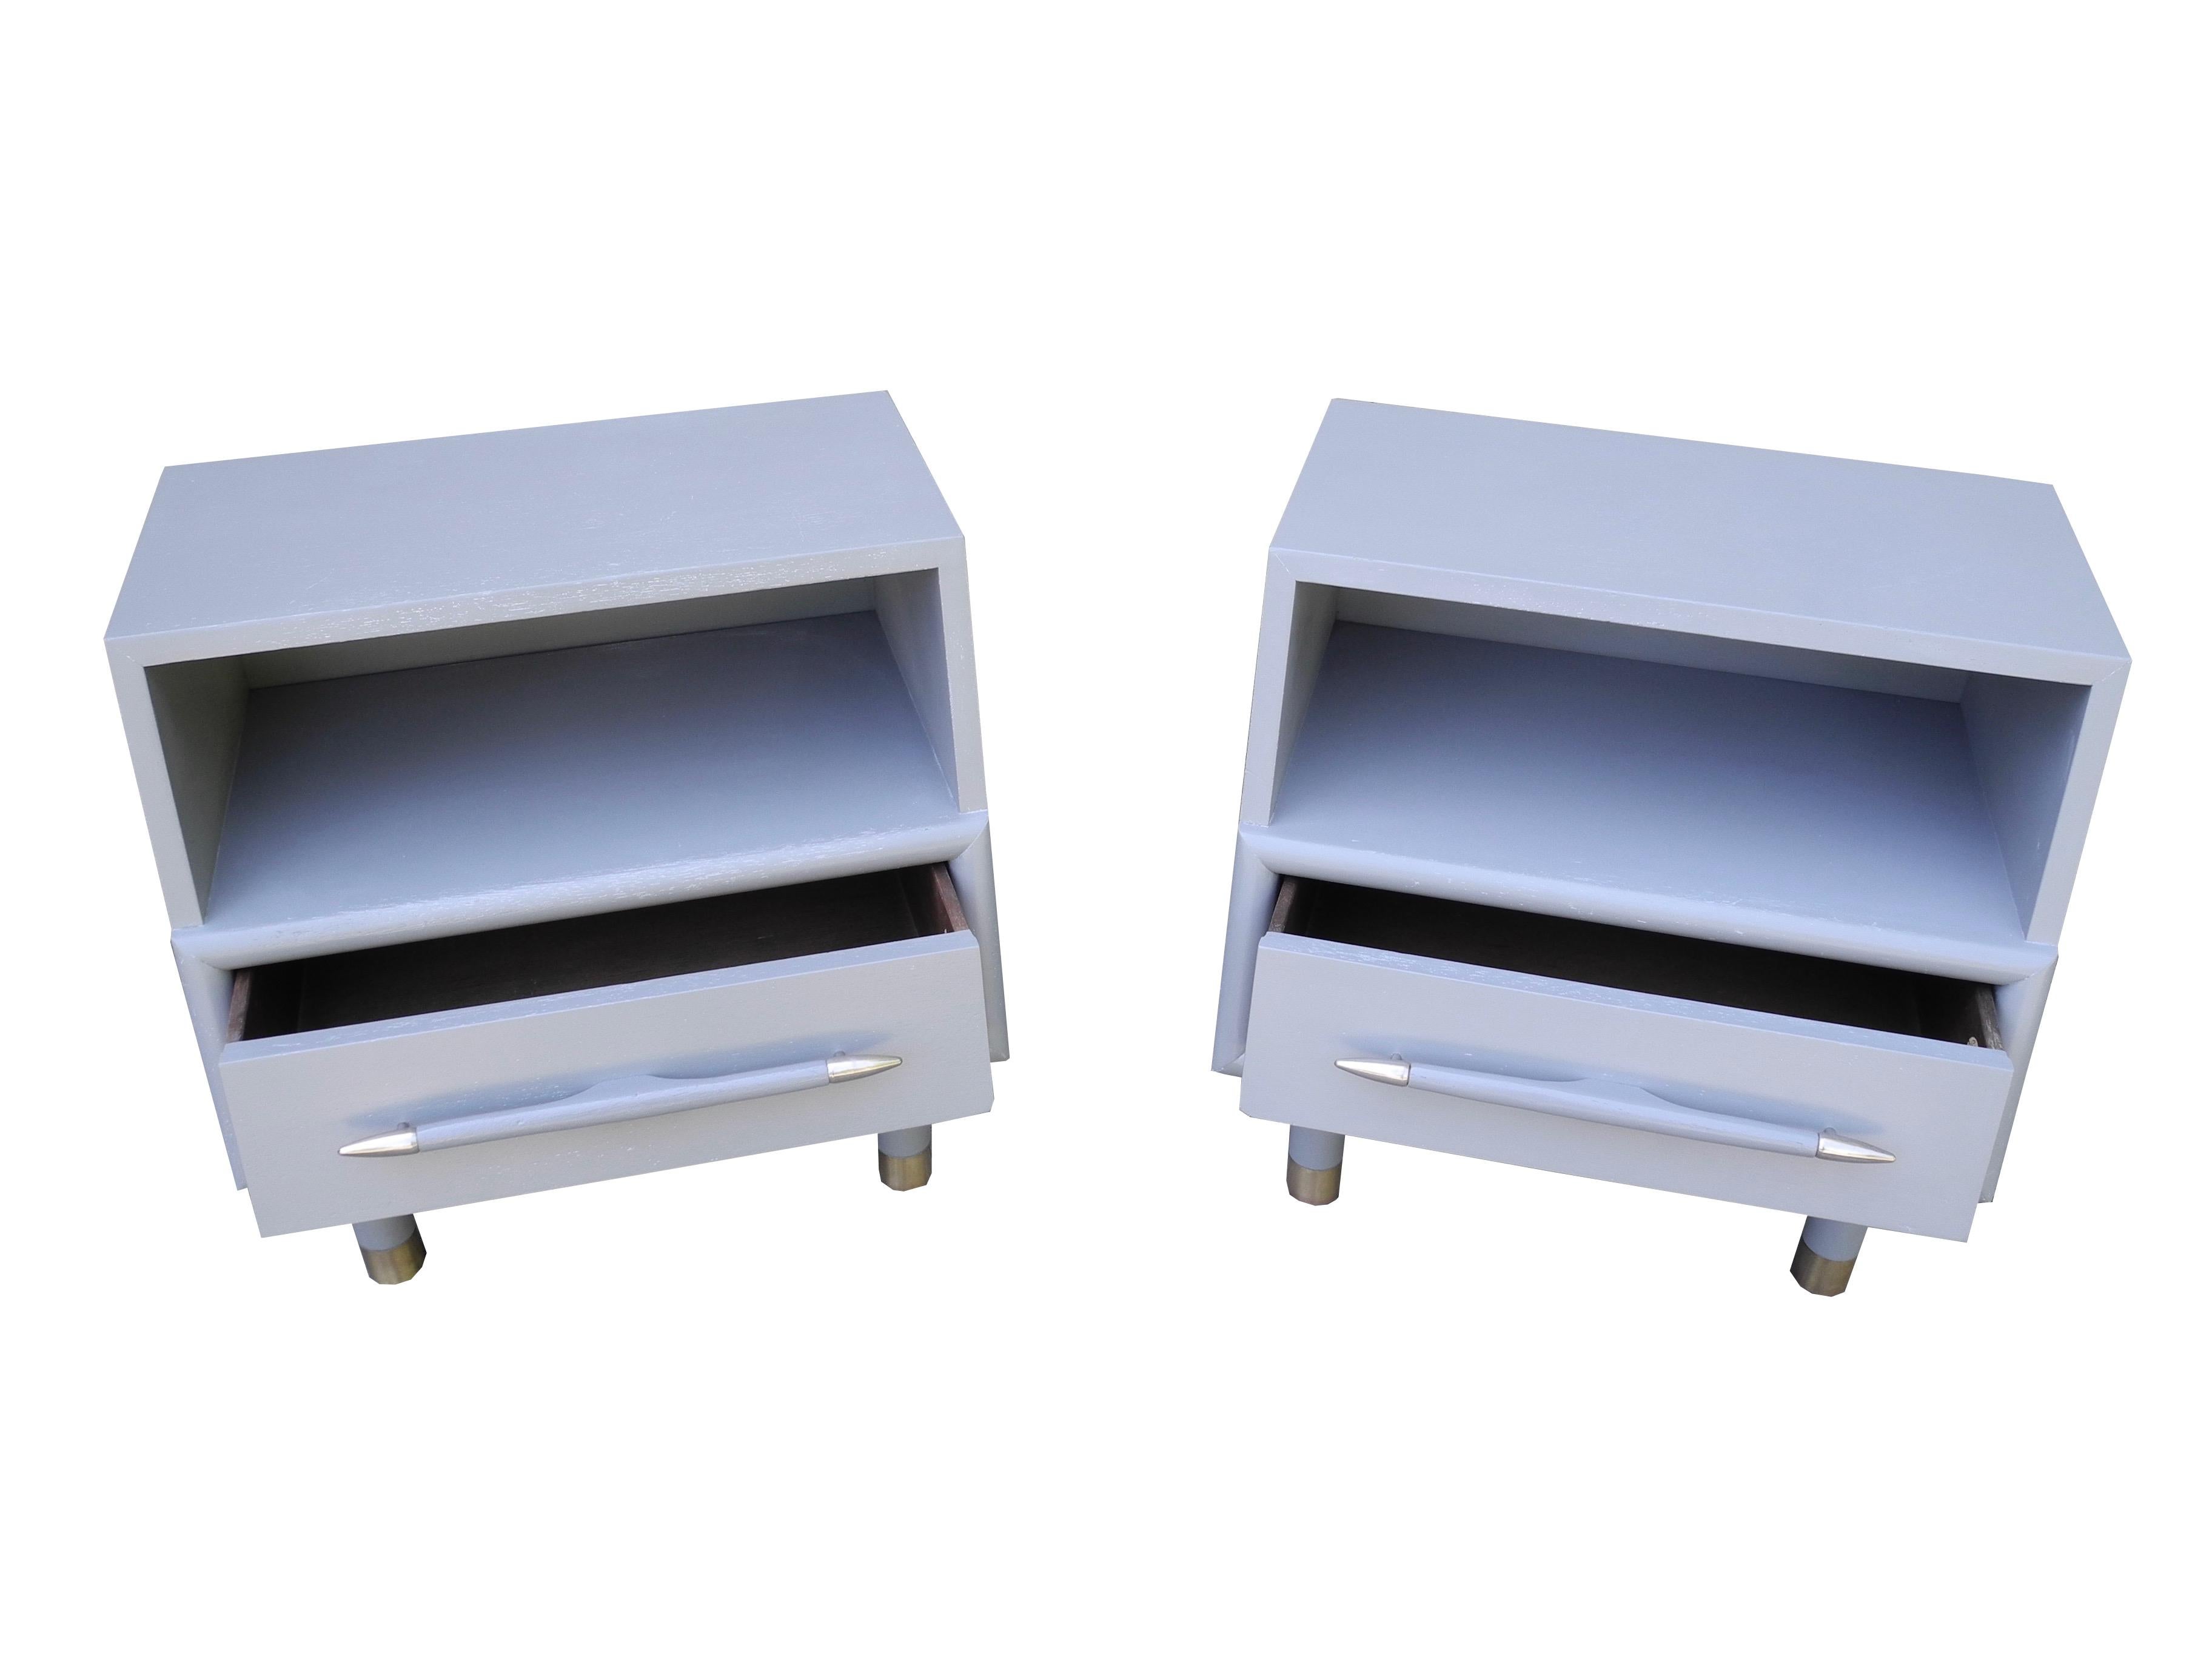 These Brown Saltman of California, 1950s designer nightstands are painted middle gray. They have brass sabots and silver metal hardware on the drawer handle. Equipped with a cubby and drawer, the profile slants from 11.5